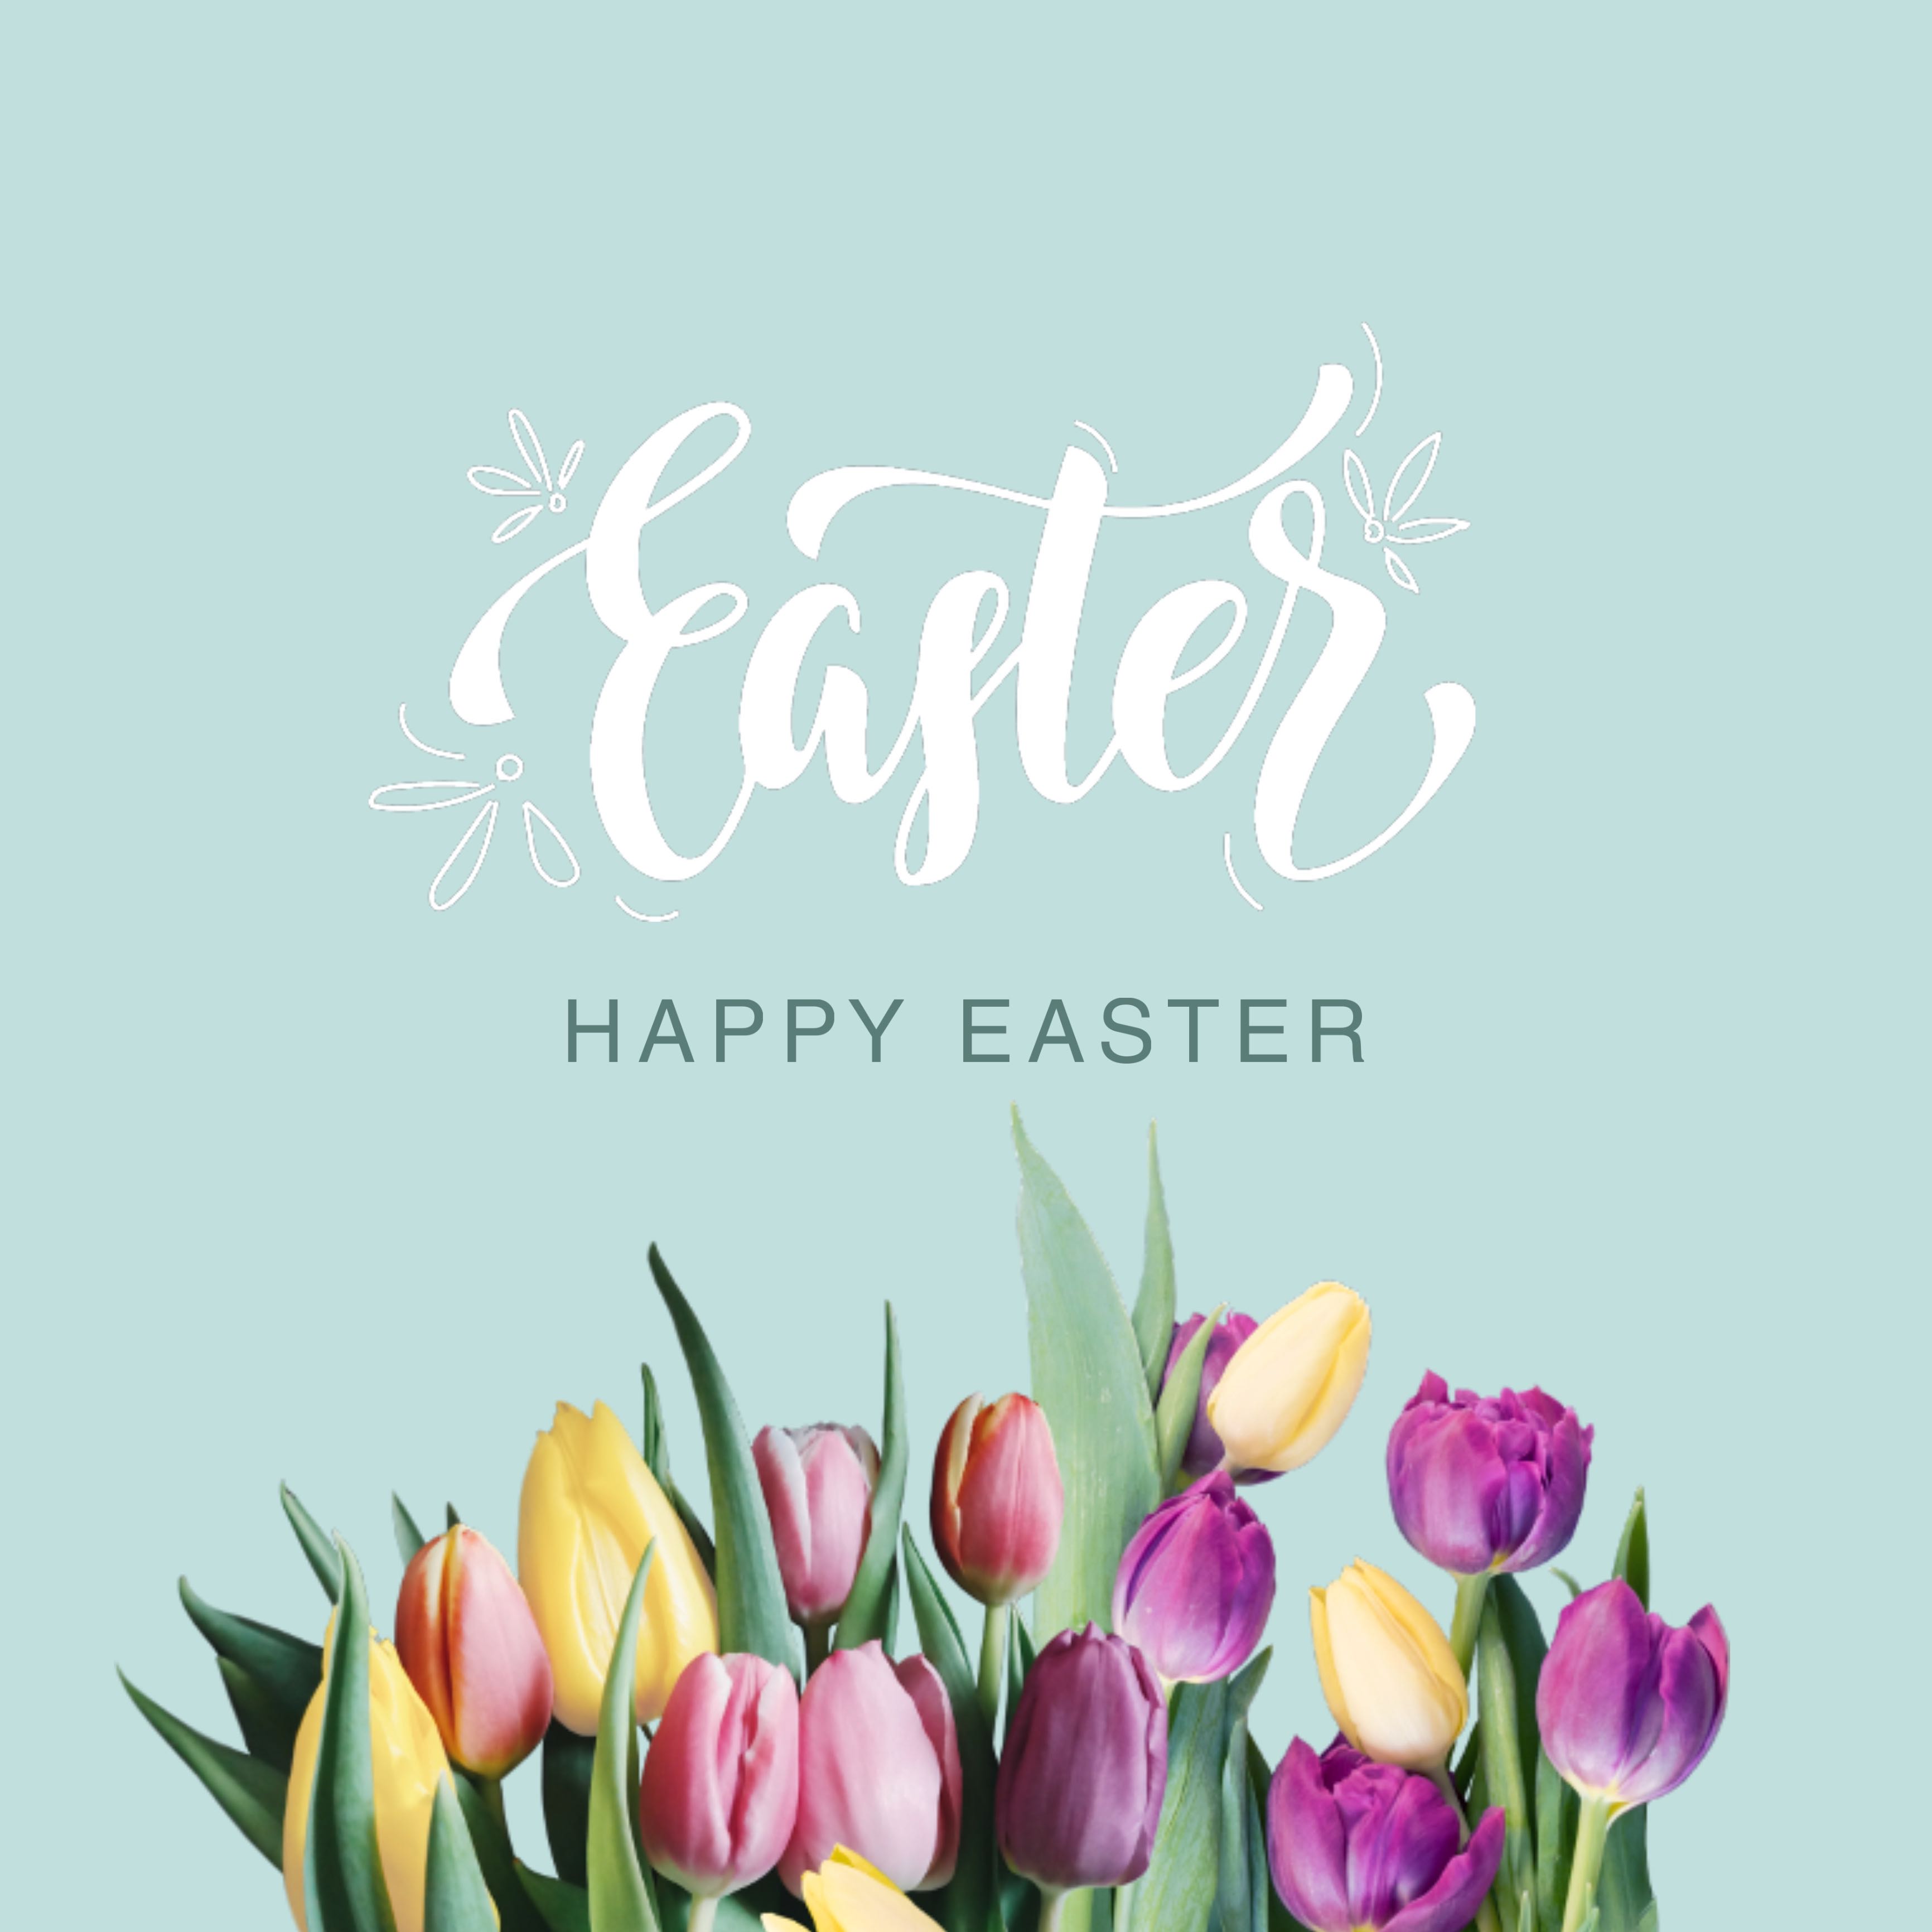 Happy Easter ??Create your own Easter cards with our new Easter templates ? #easter #happyeaster #bunny #flowers #spring #freetoedit 